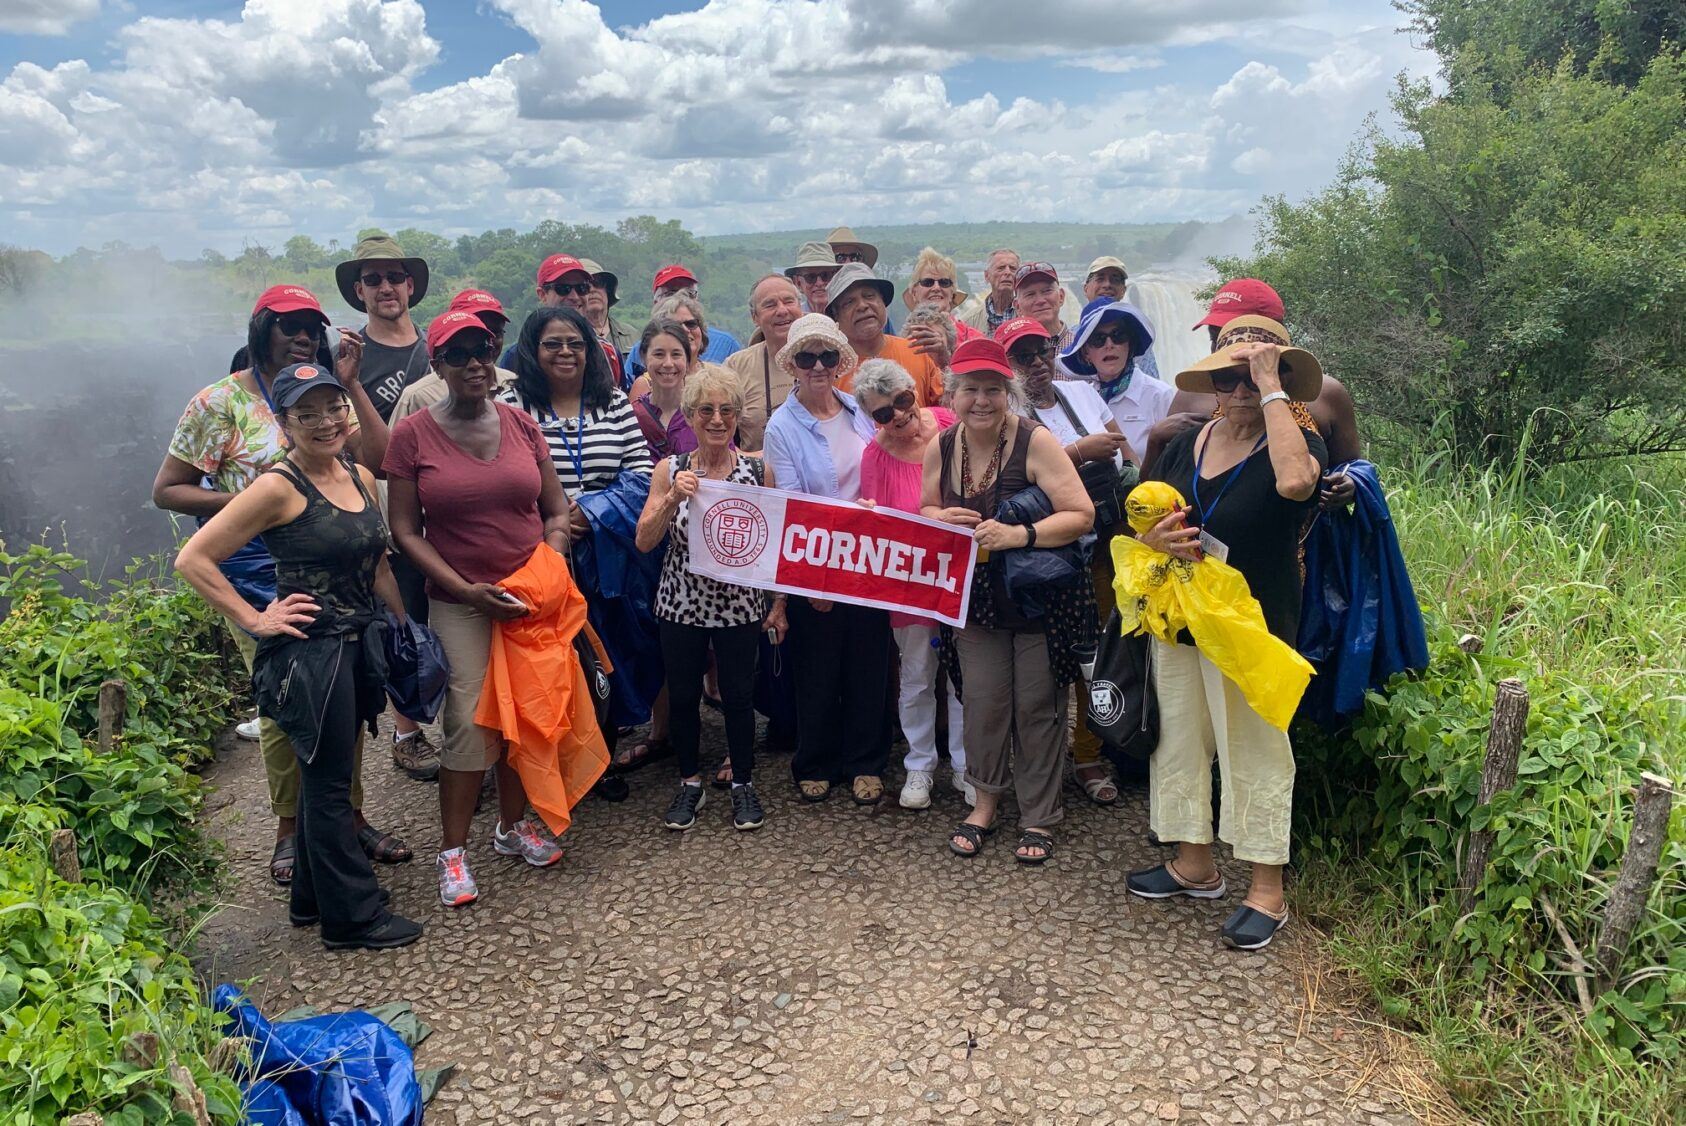 Alumni holding up a Cornell pennant in Africa